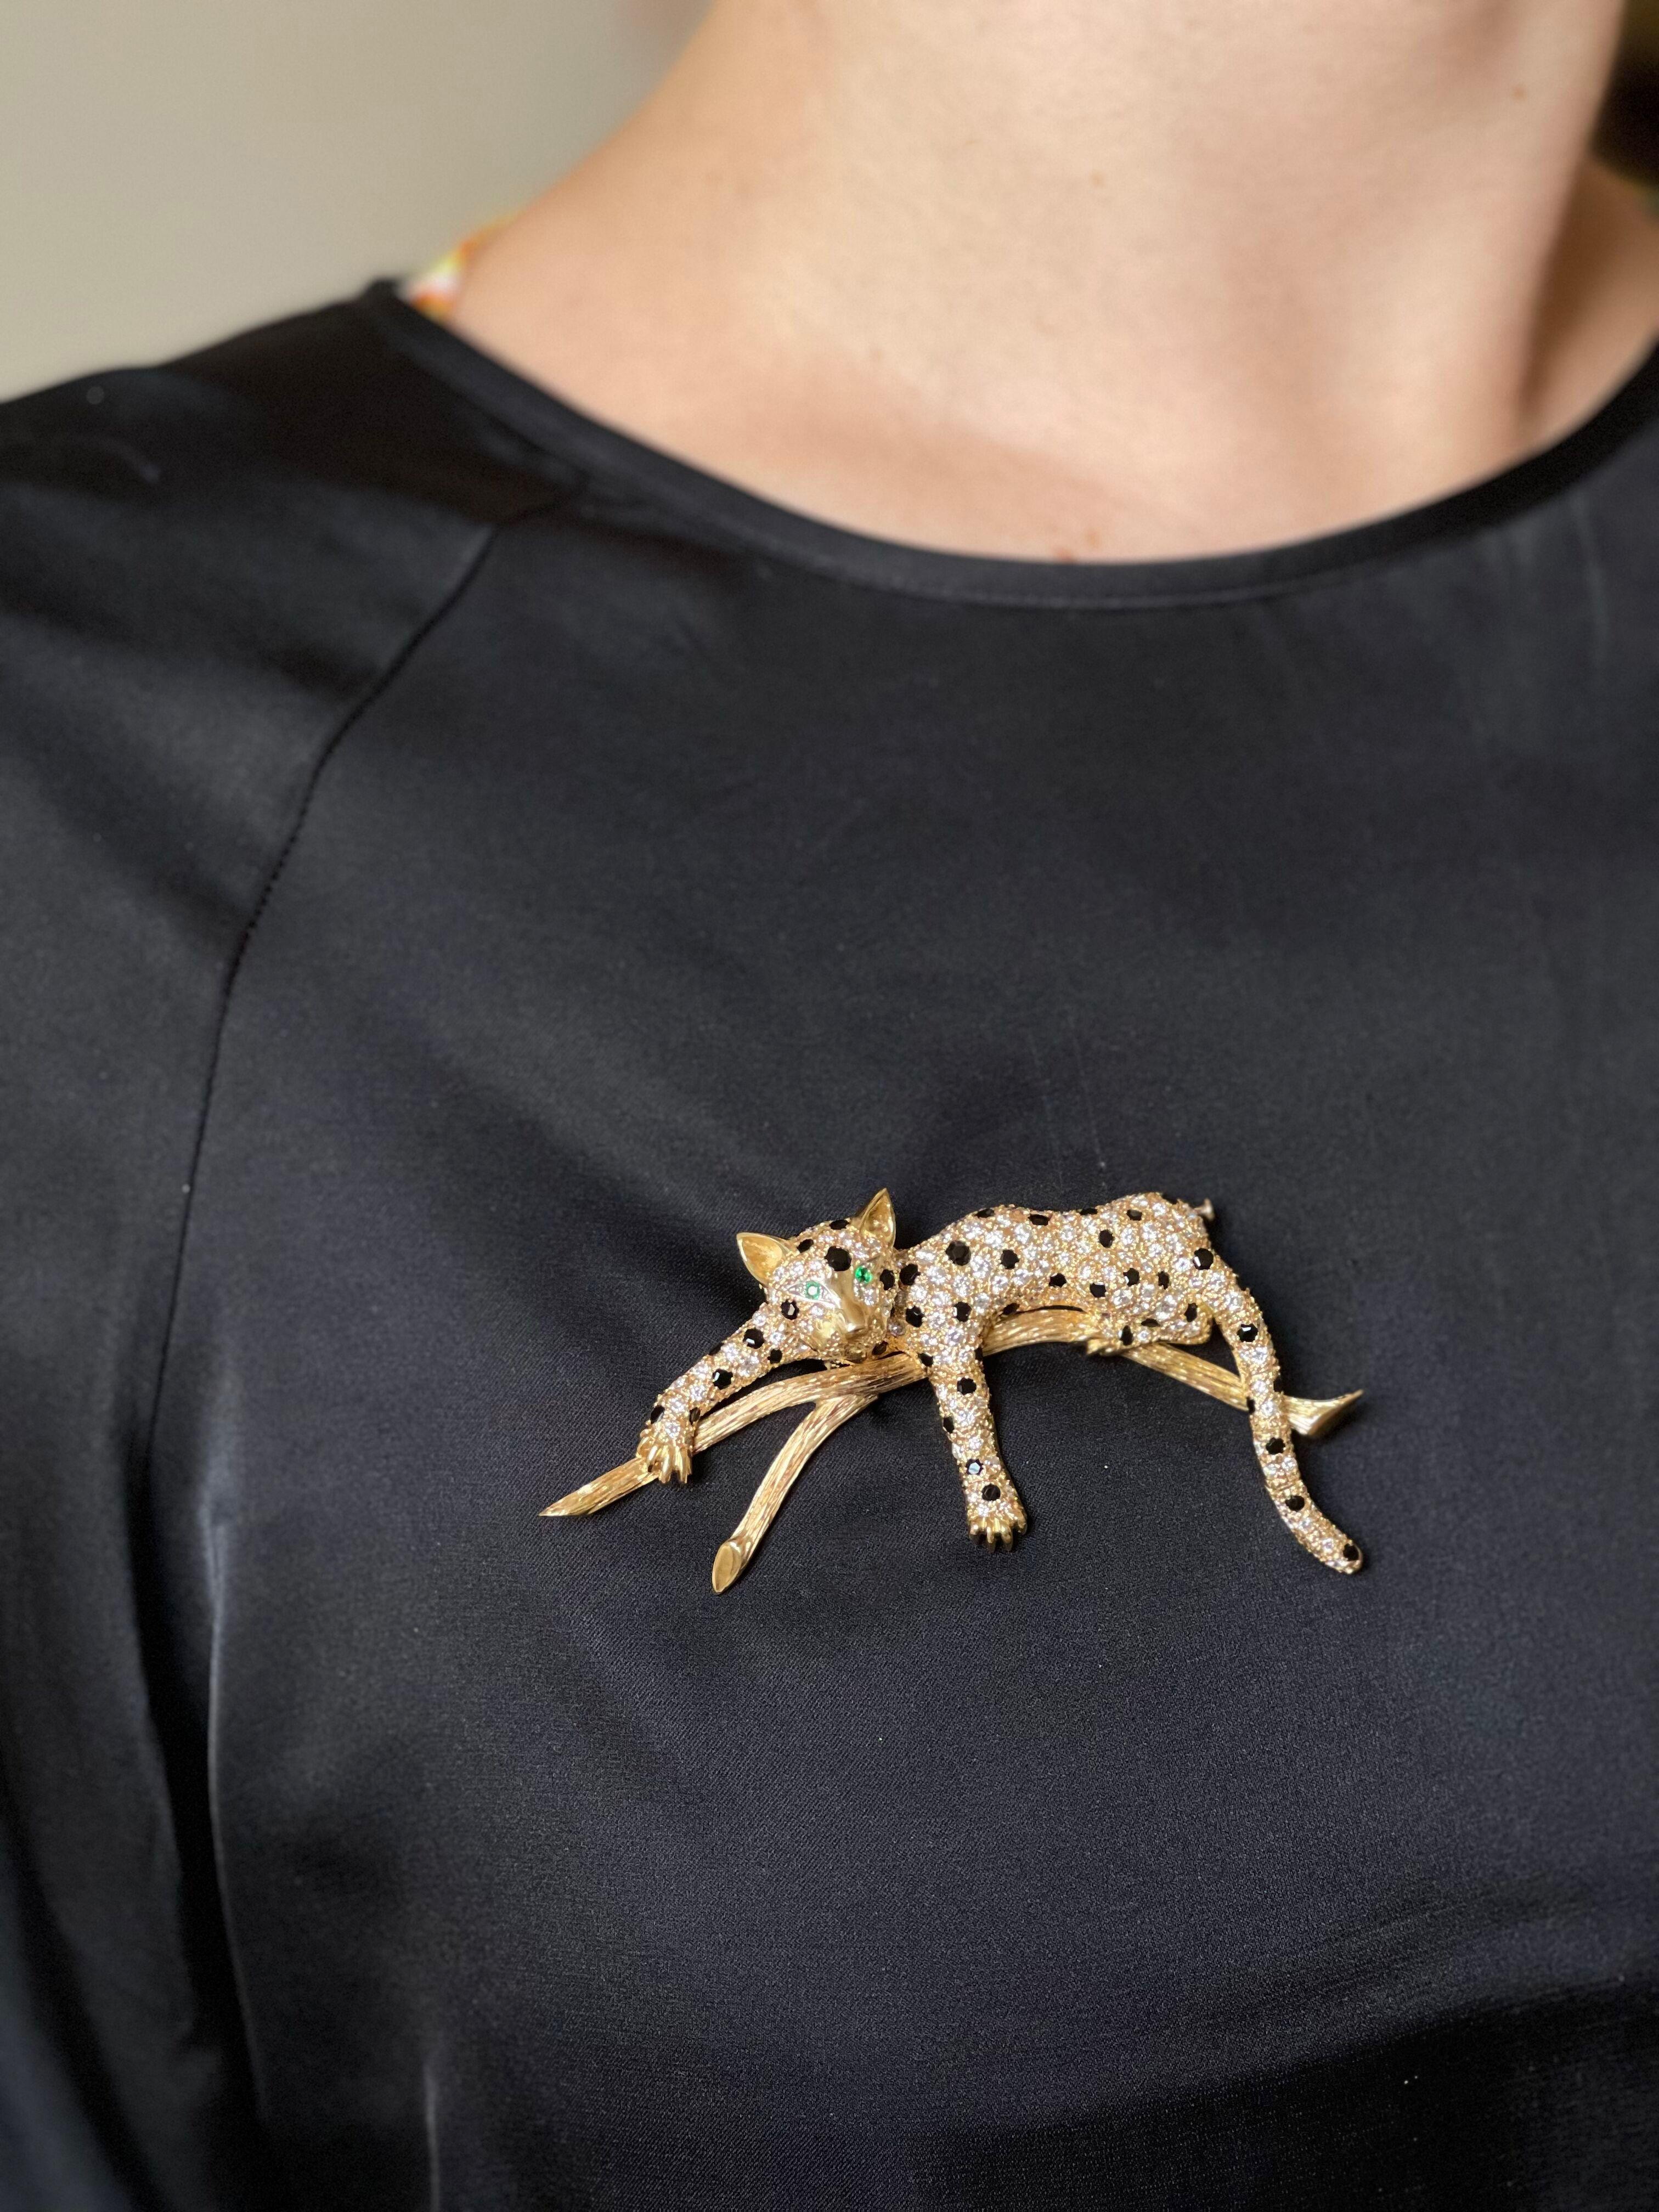 18k yellow gold leopard brooch, set with approx. 1.20ctw H/VS-Si diamonds, emerald eyes and onyx. The brooch measures 3.75